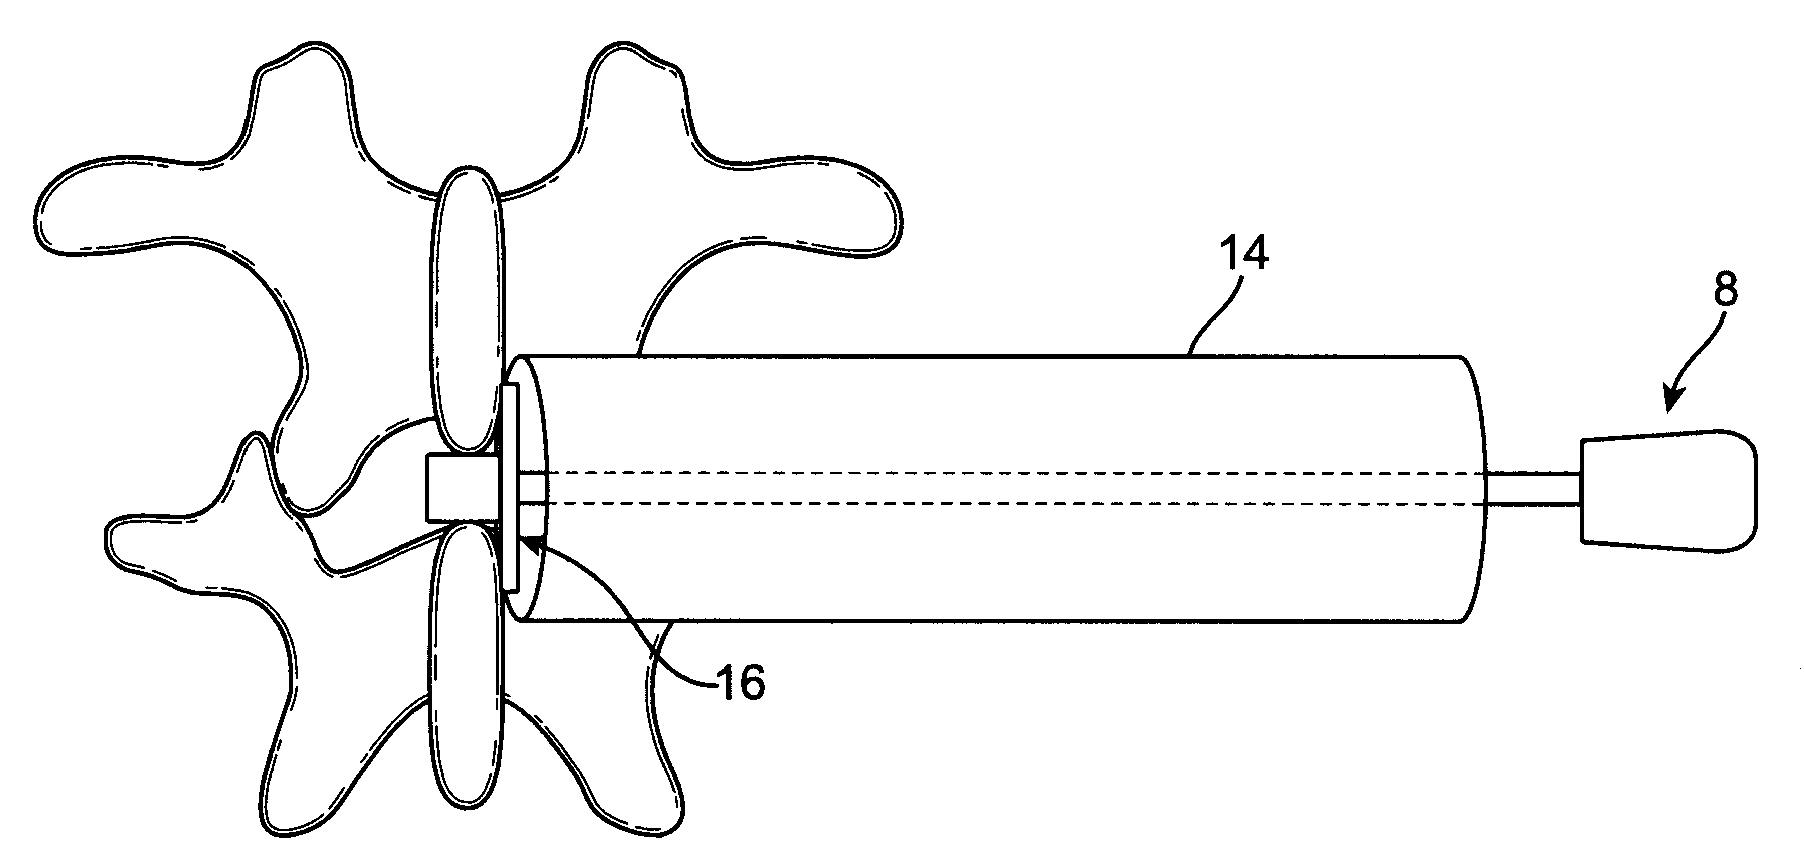 Implant device and method for interspinous distraction